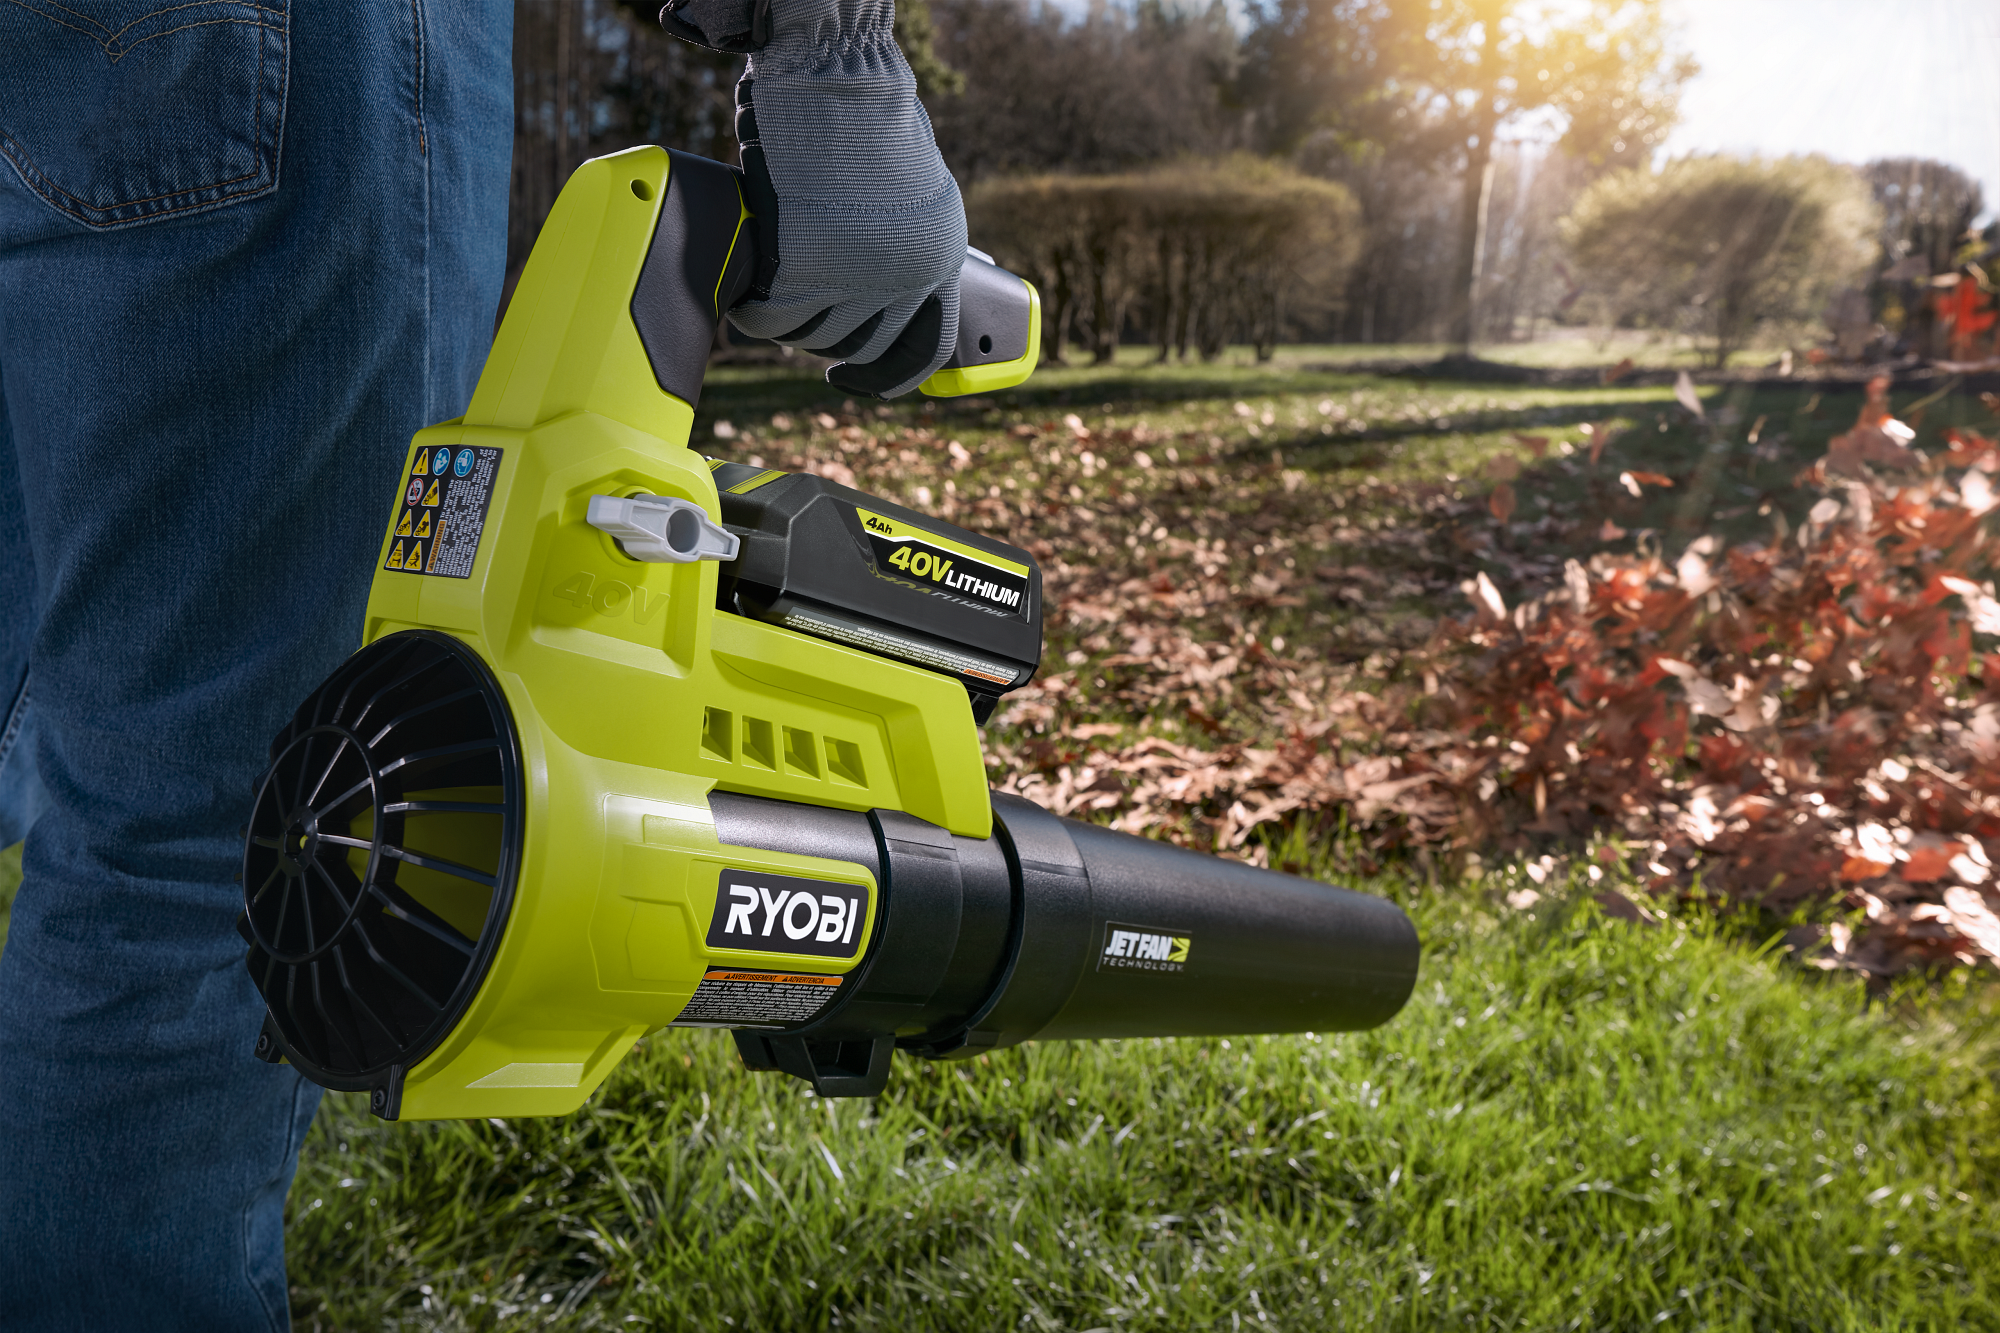 Product Features Image for 40V LITHIUM-ION CORDLESS 525 CFM 110 MPH JET FAN LEAF BLOWER.